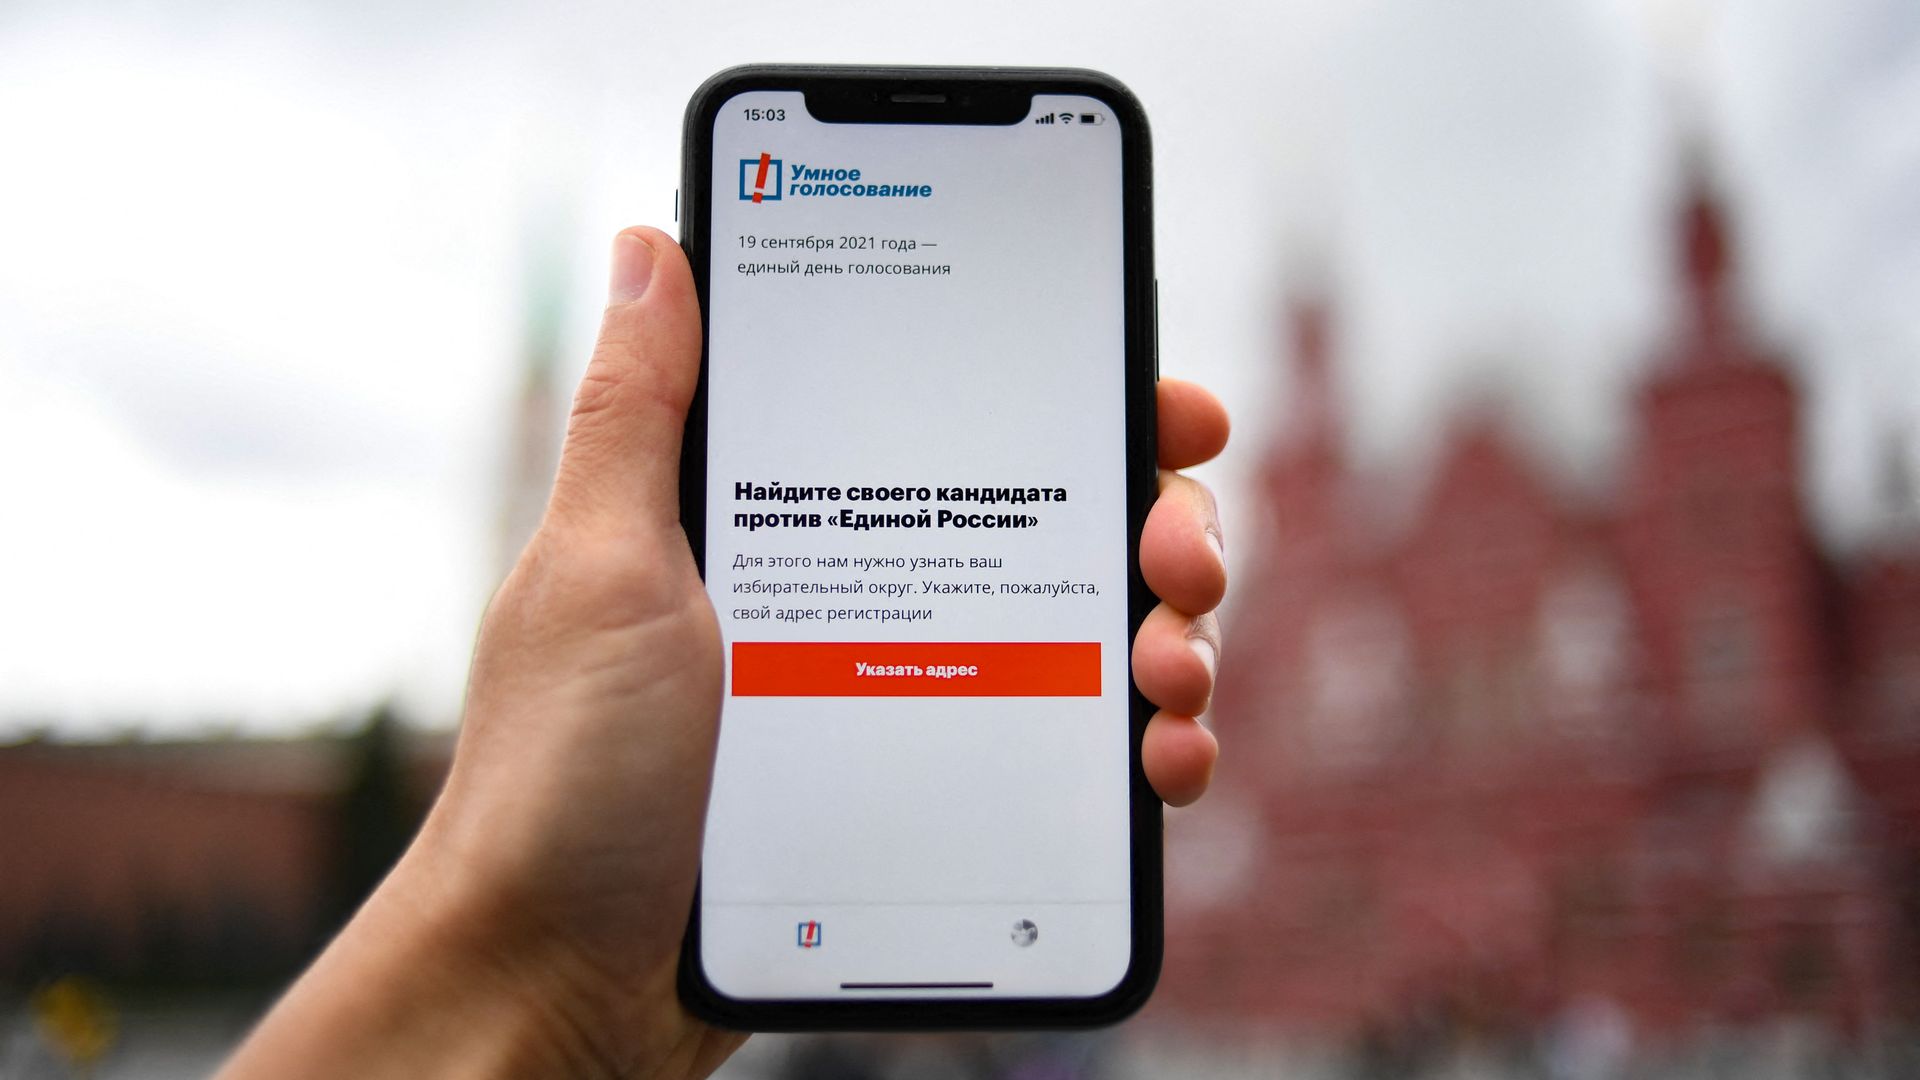 A smartphone screen displaying jailed Kremlin critic Alexei Navalny's app that aims to help Russians to vote out candidates from the ruling United Russia party in the upcoming polls.